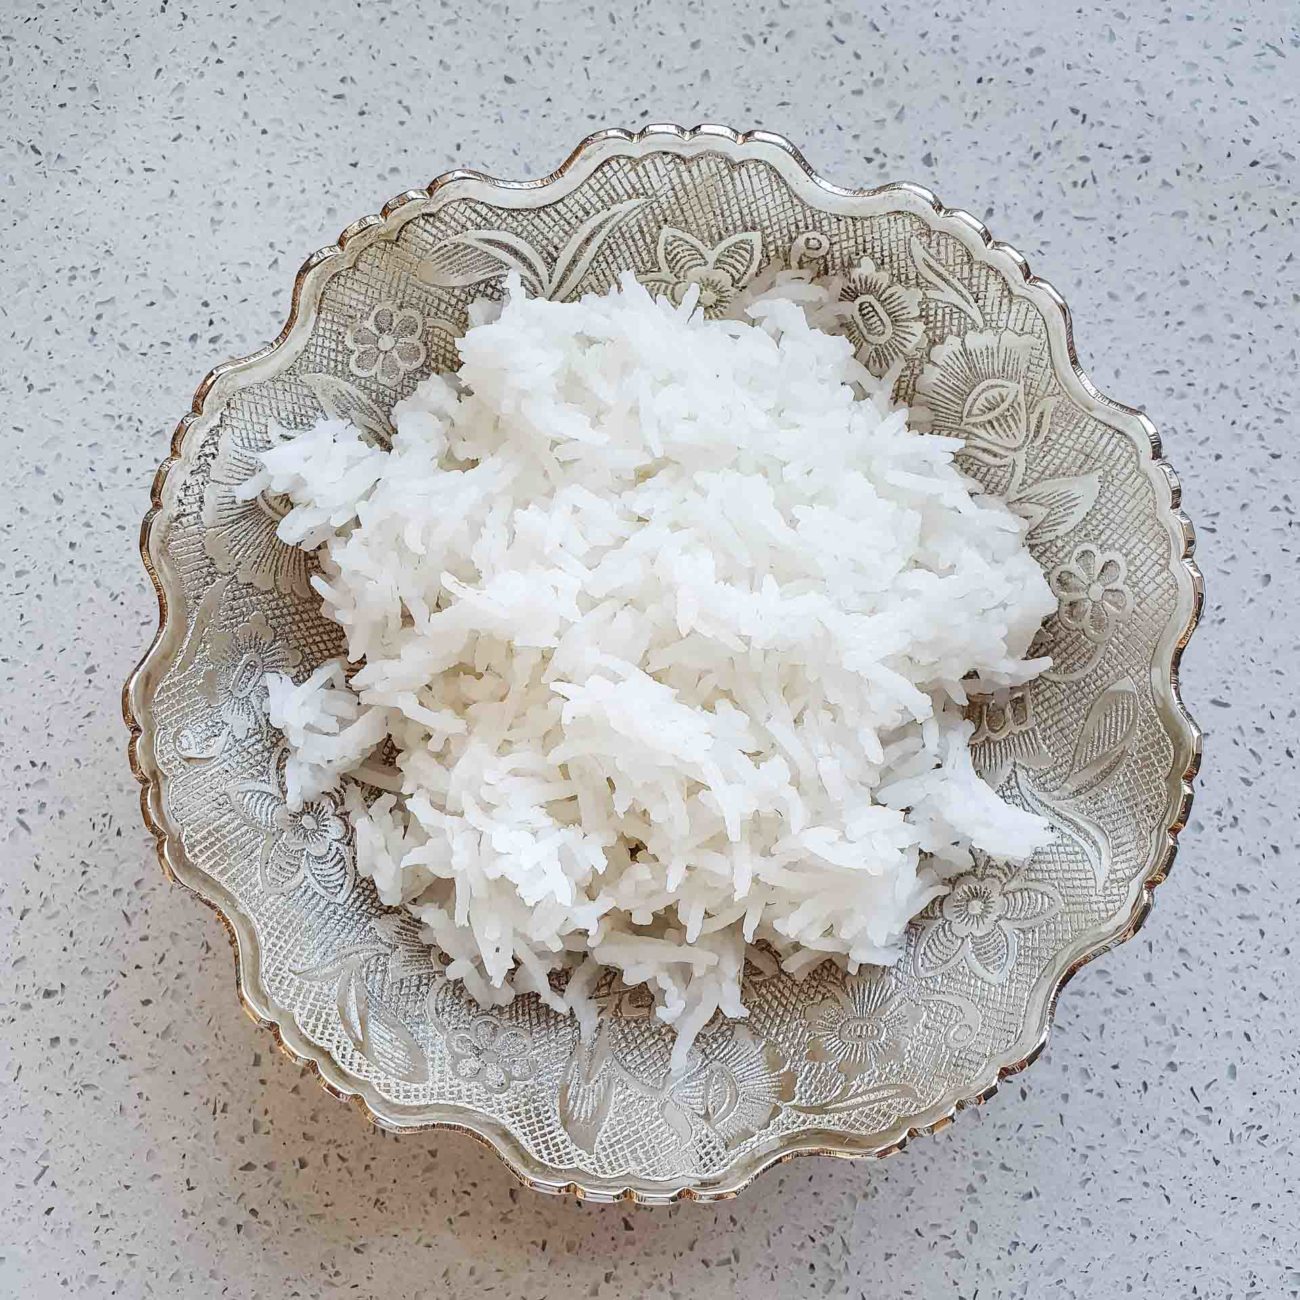 Fluffy Basmati Rice for Indian Food